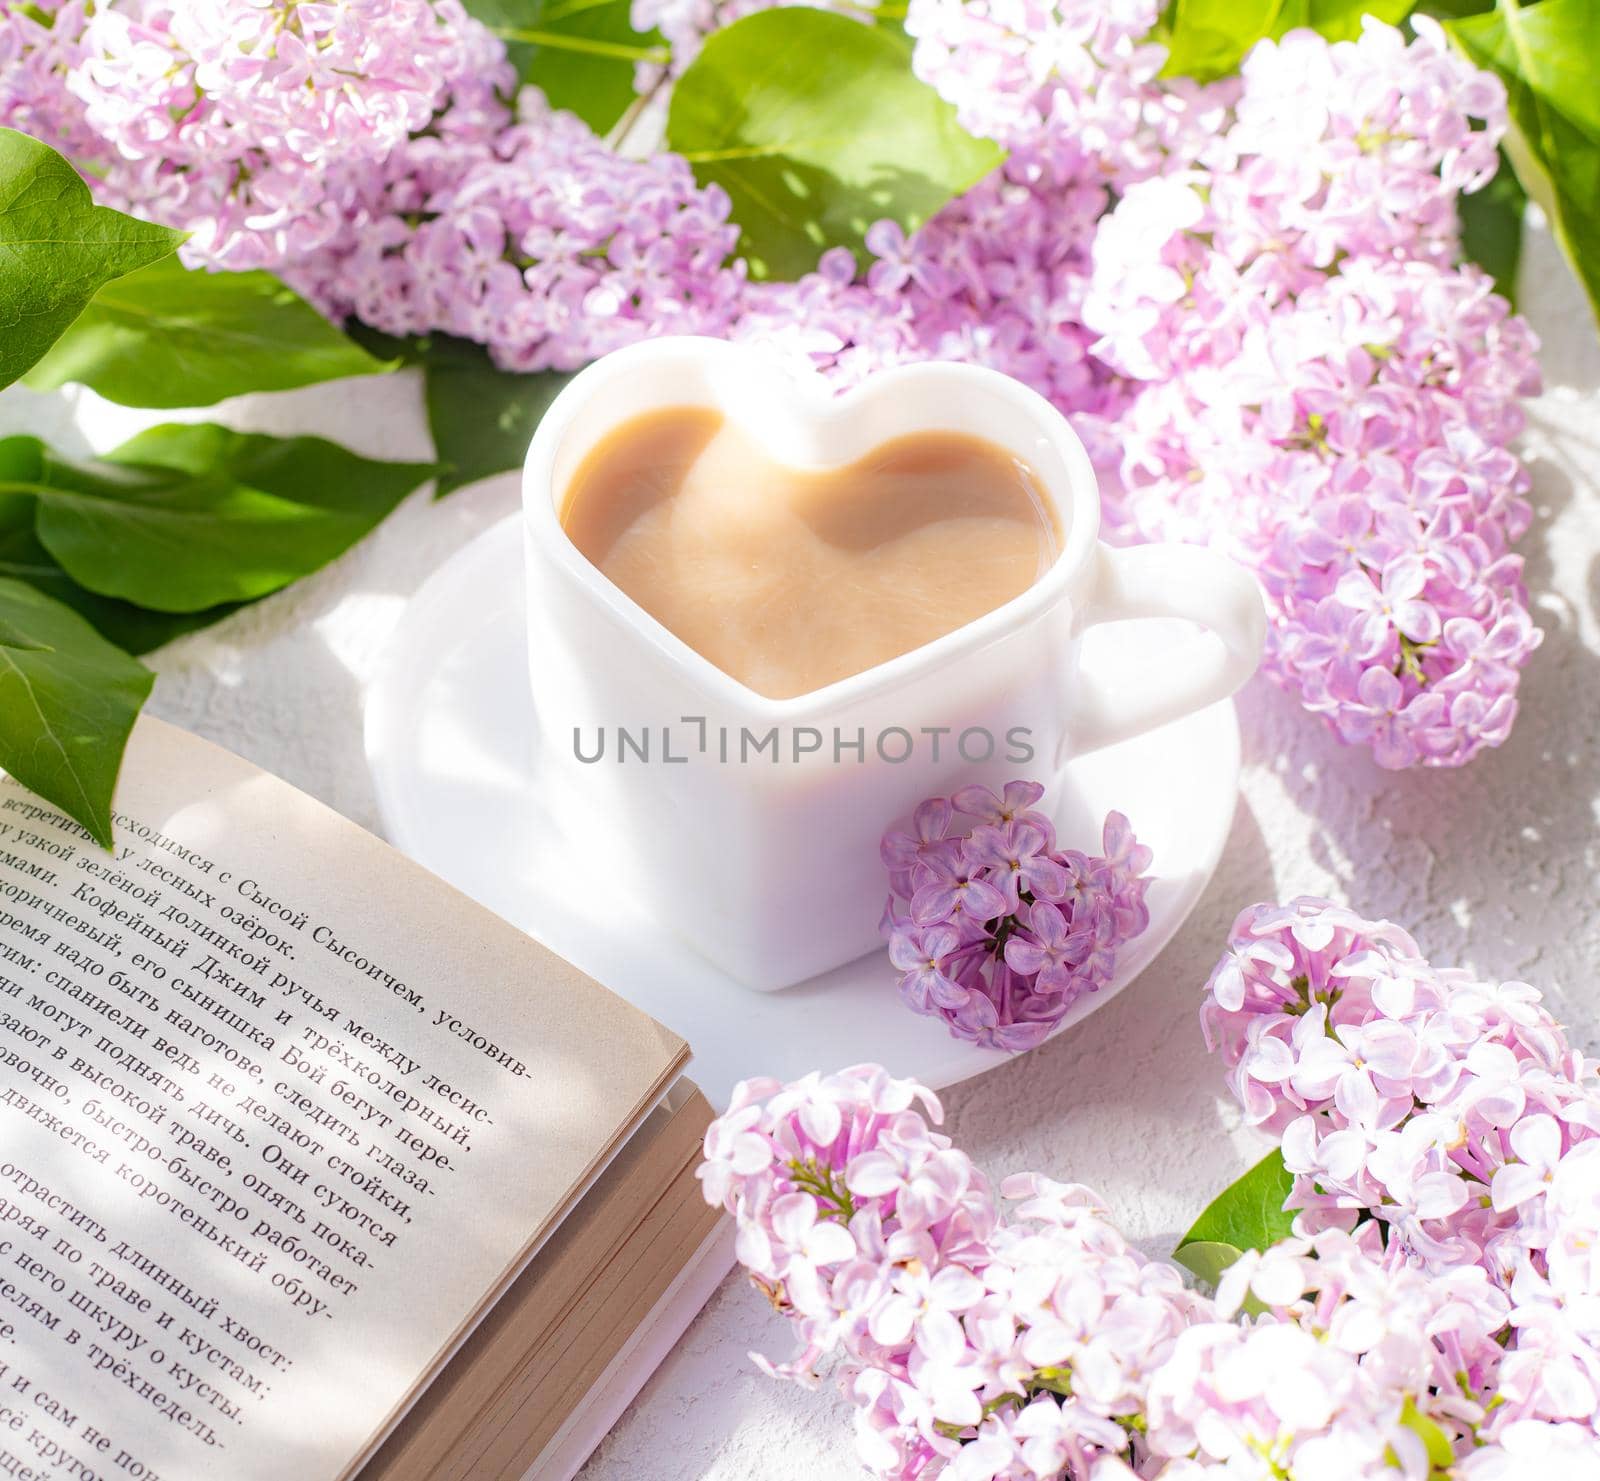 Cappuccino coffee in a cup and a branch of lilac on a white background with shadows . A hot drink. relax. The concept of cafeteria advertising. Article about cappuccino. Making cappuccino. Lilac branches. Copy space by alenka2194